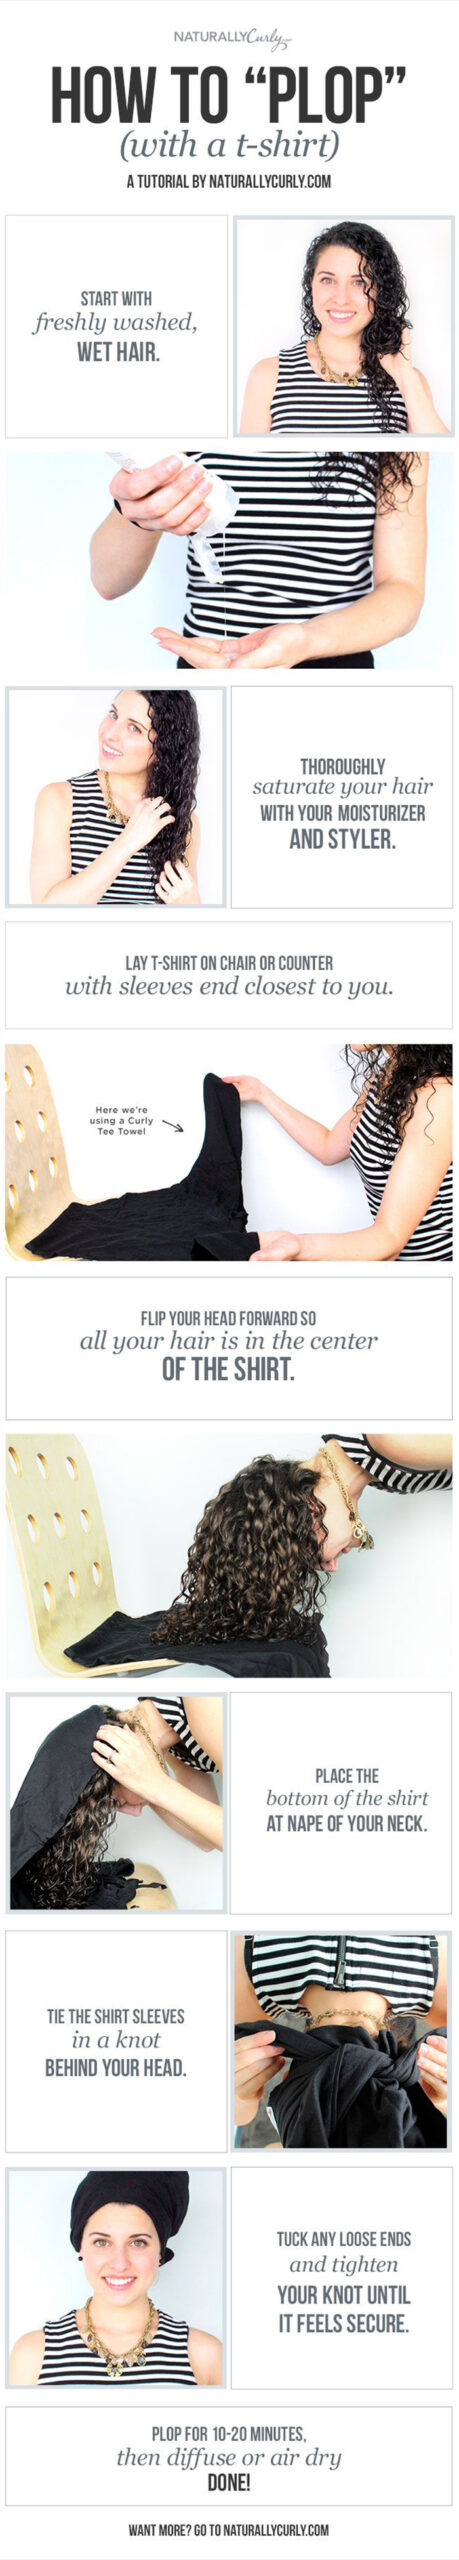 Bakterie Fritid Muligt How to Plop Curly Hair: A Curly Girl's Guide | NaturallyCurly.com